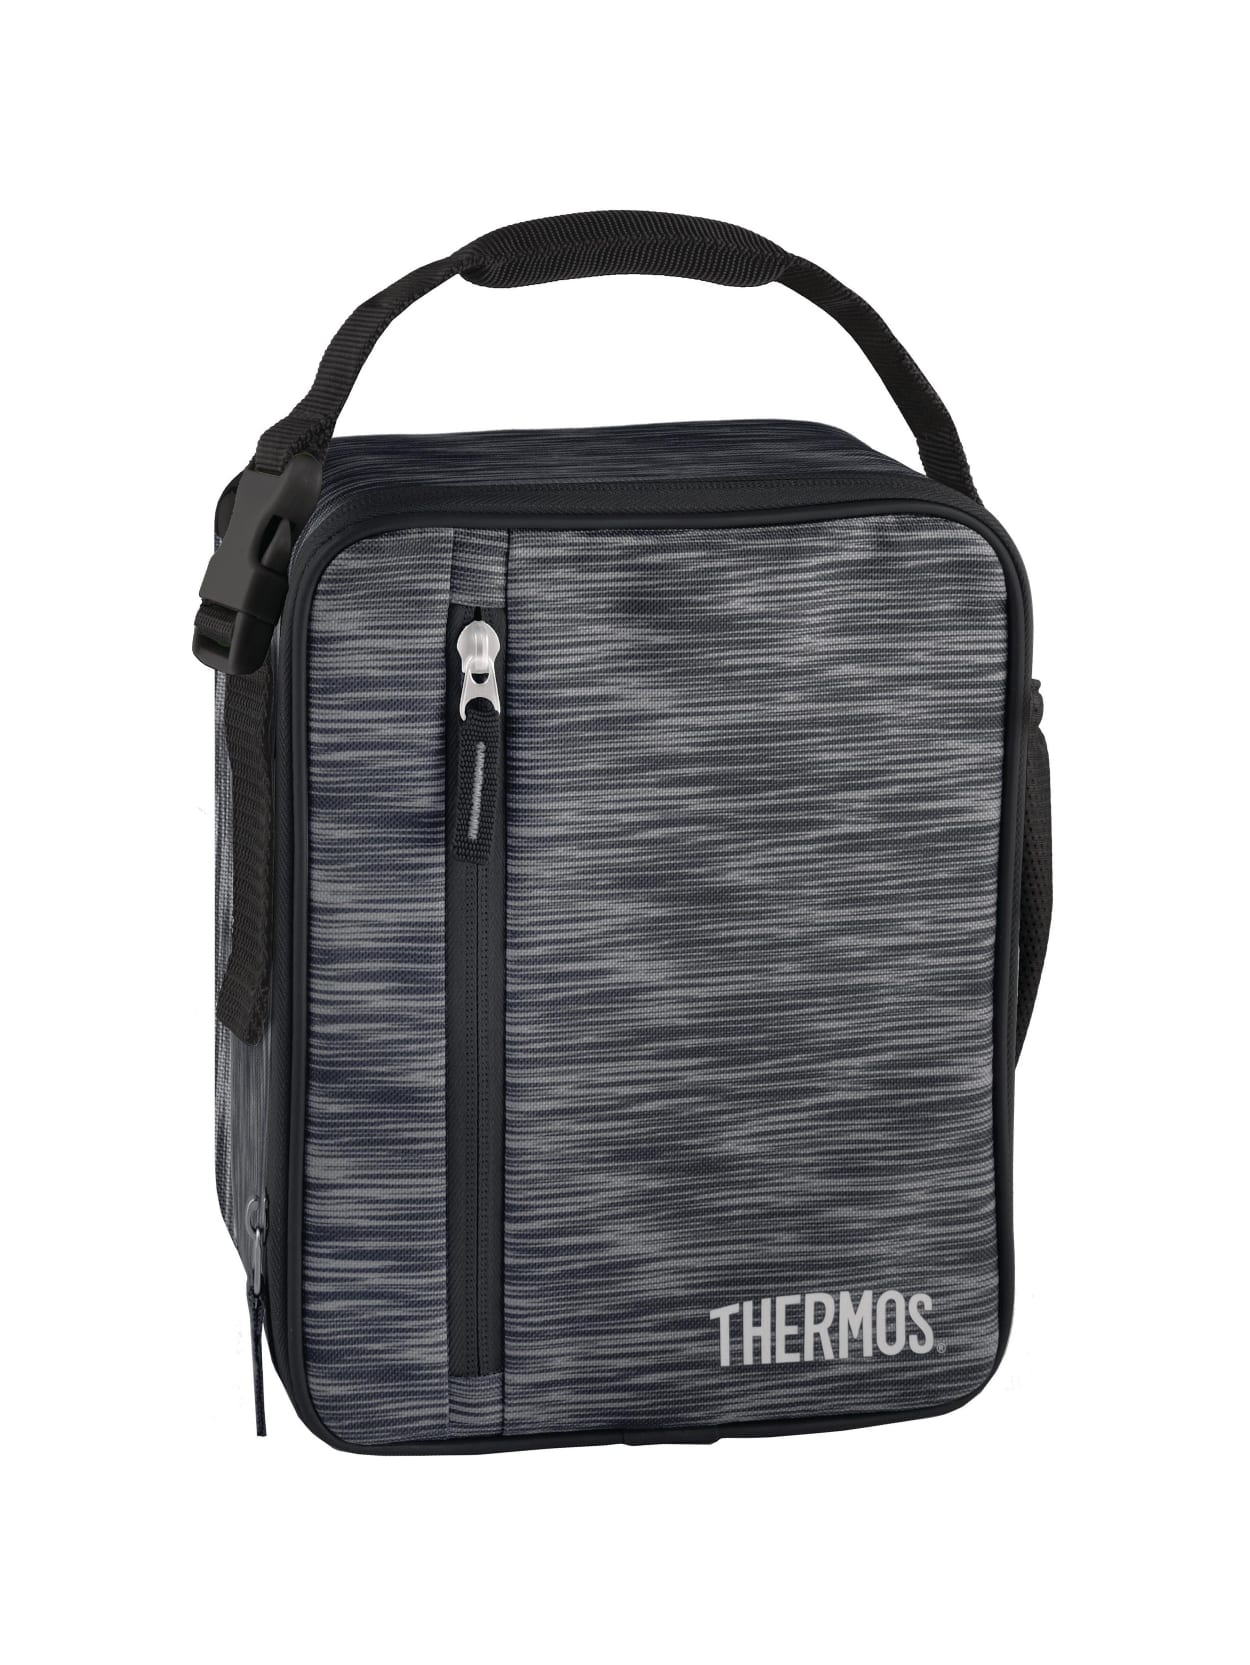 Thermos Upright Insulated Lunch Bag 